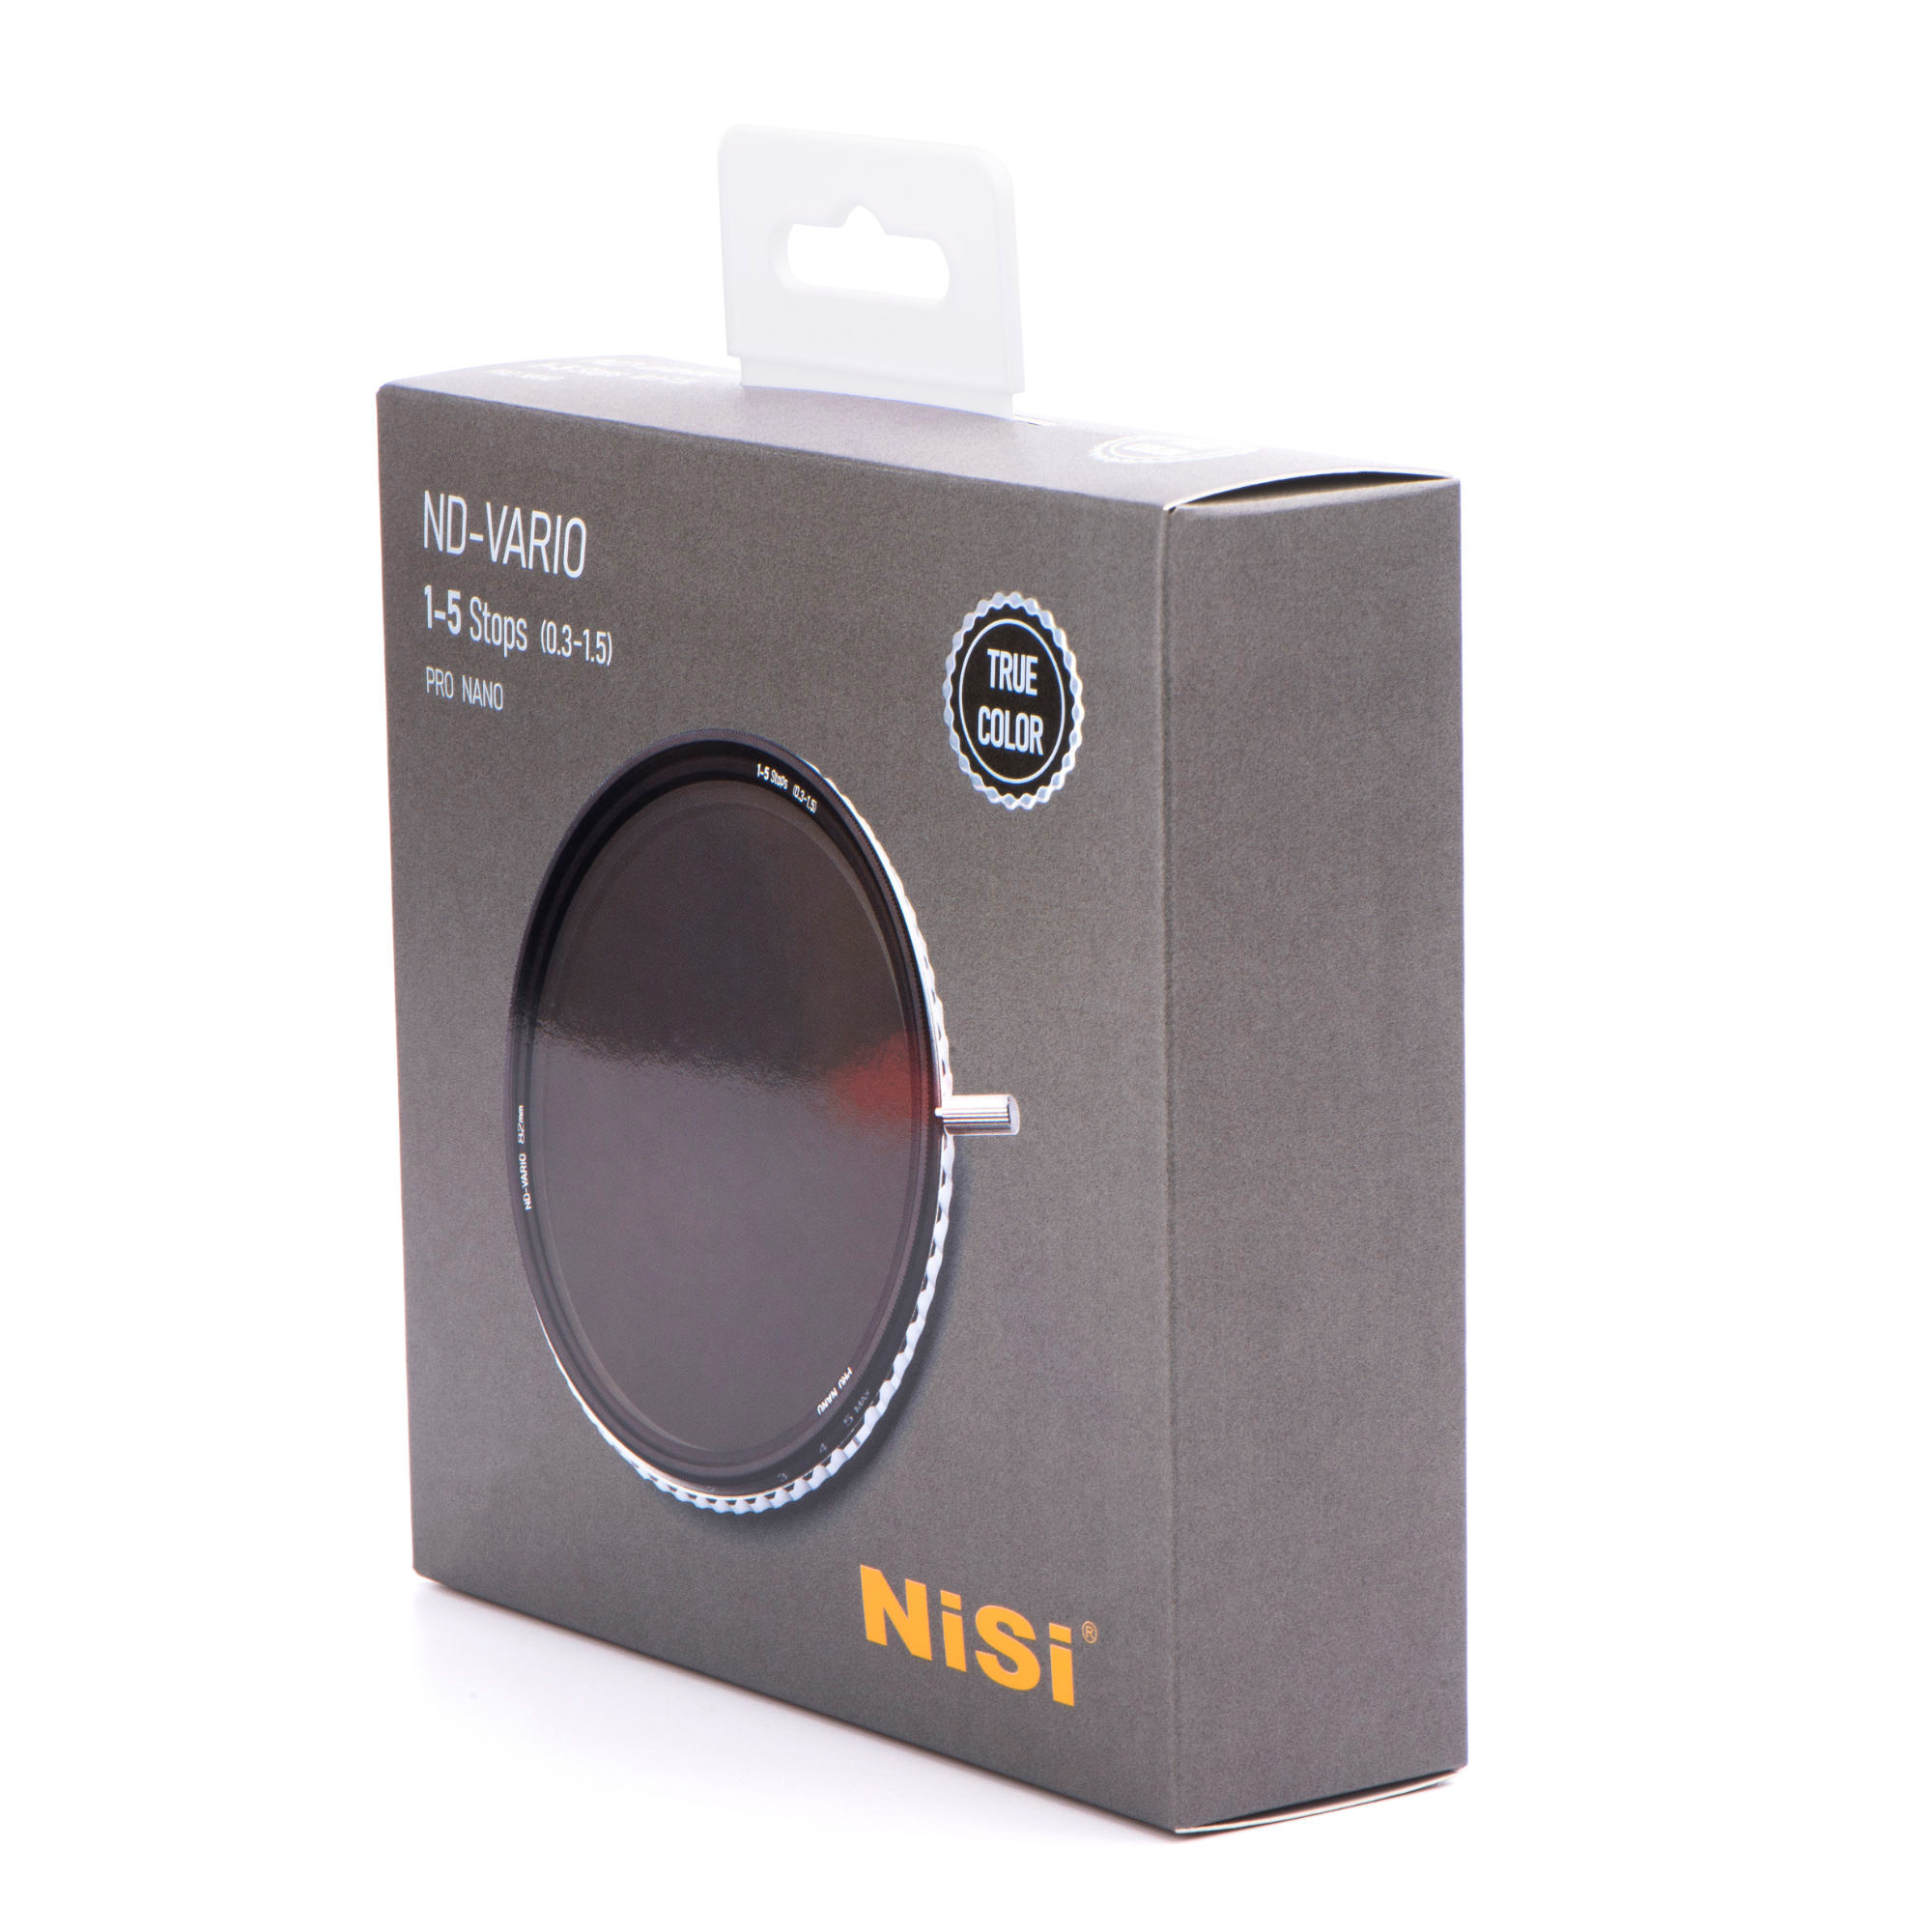 NiSi 95mm Swift True Color ND-VARIO Pro Nano 1-5stops Variable ND 